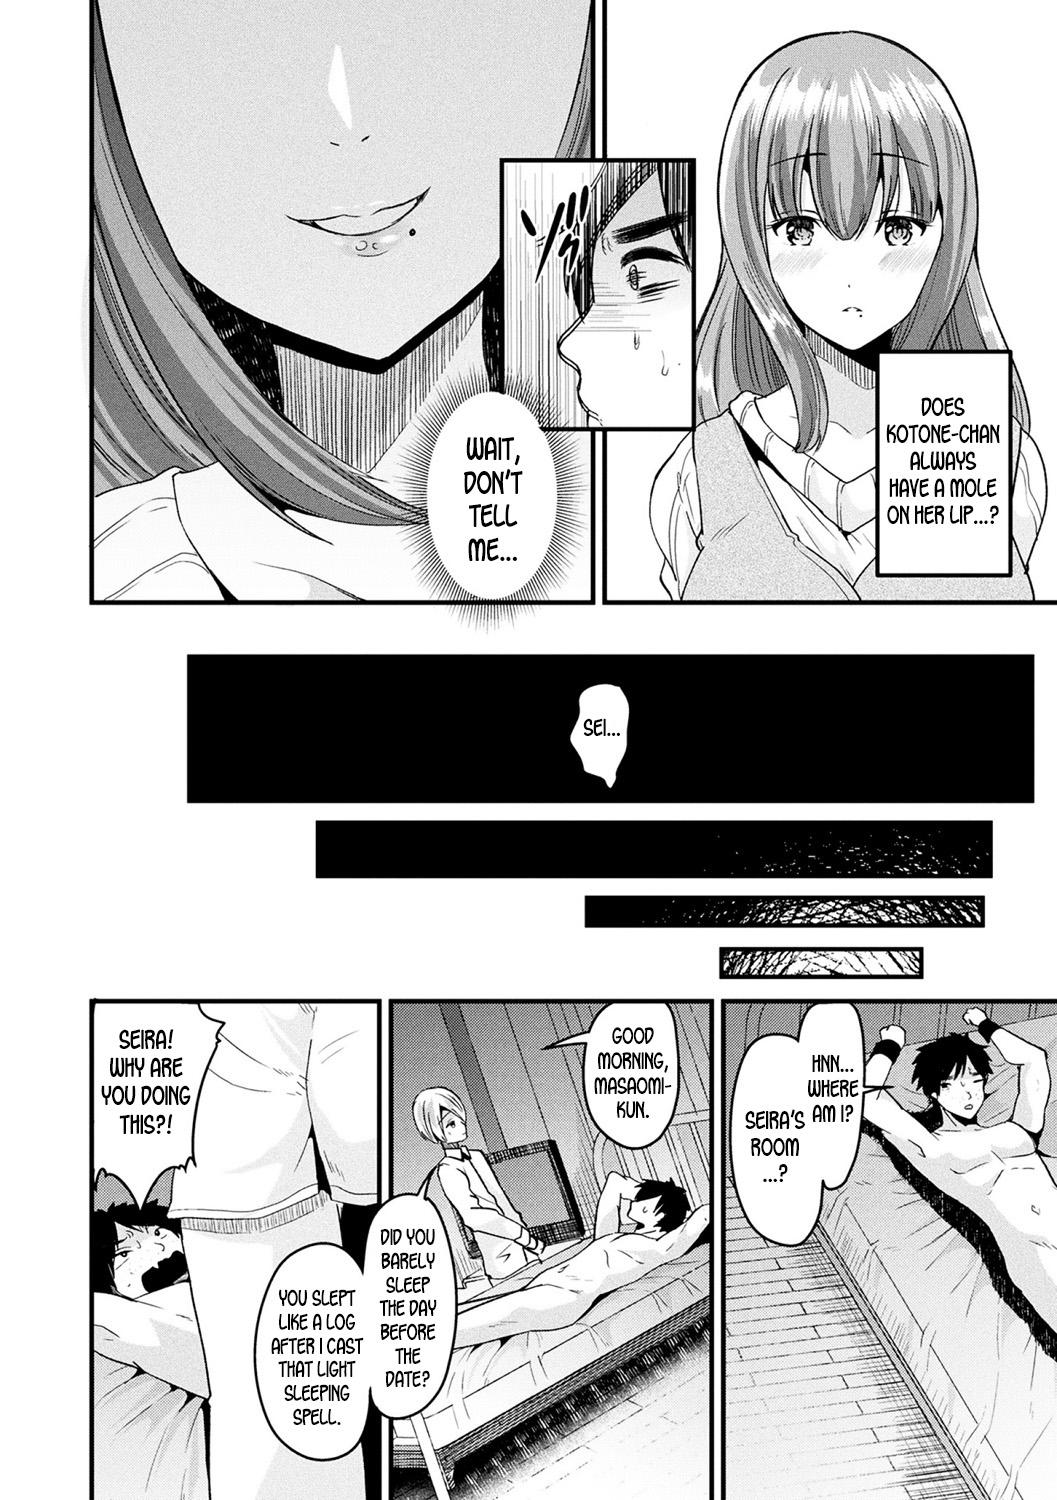 Tight Cunt Nyotaika Shite Yandere Kanojo ni Naru | Turn into a Girl and Become a Yandere Girlfriend Les - Page 6